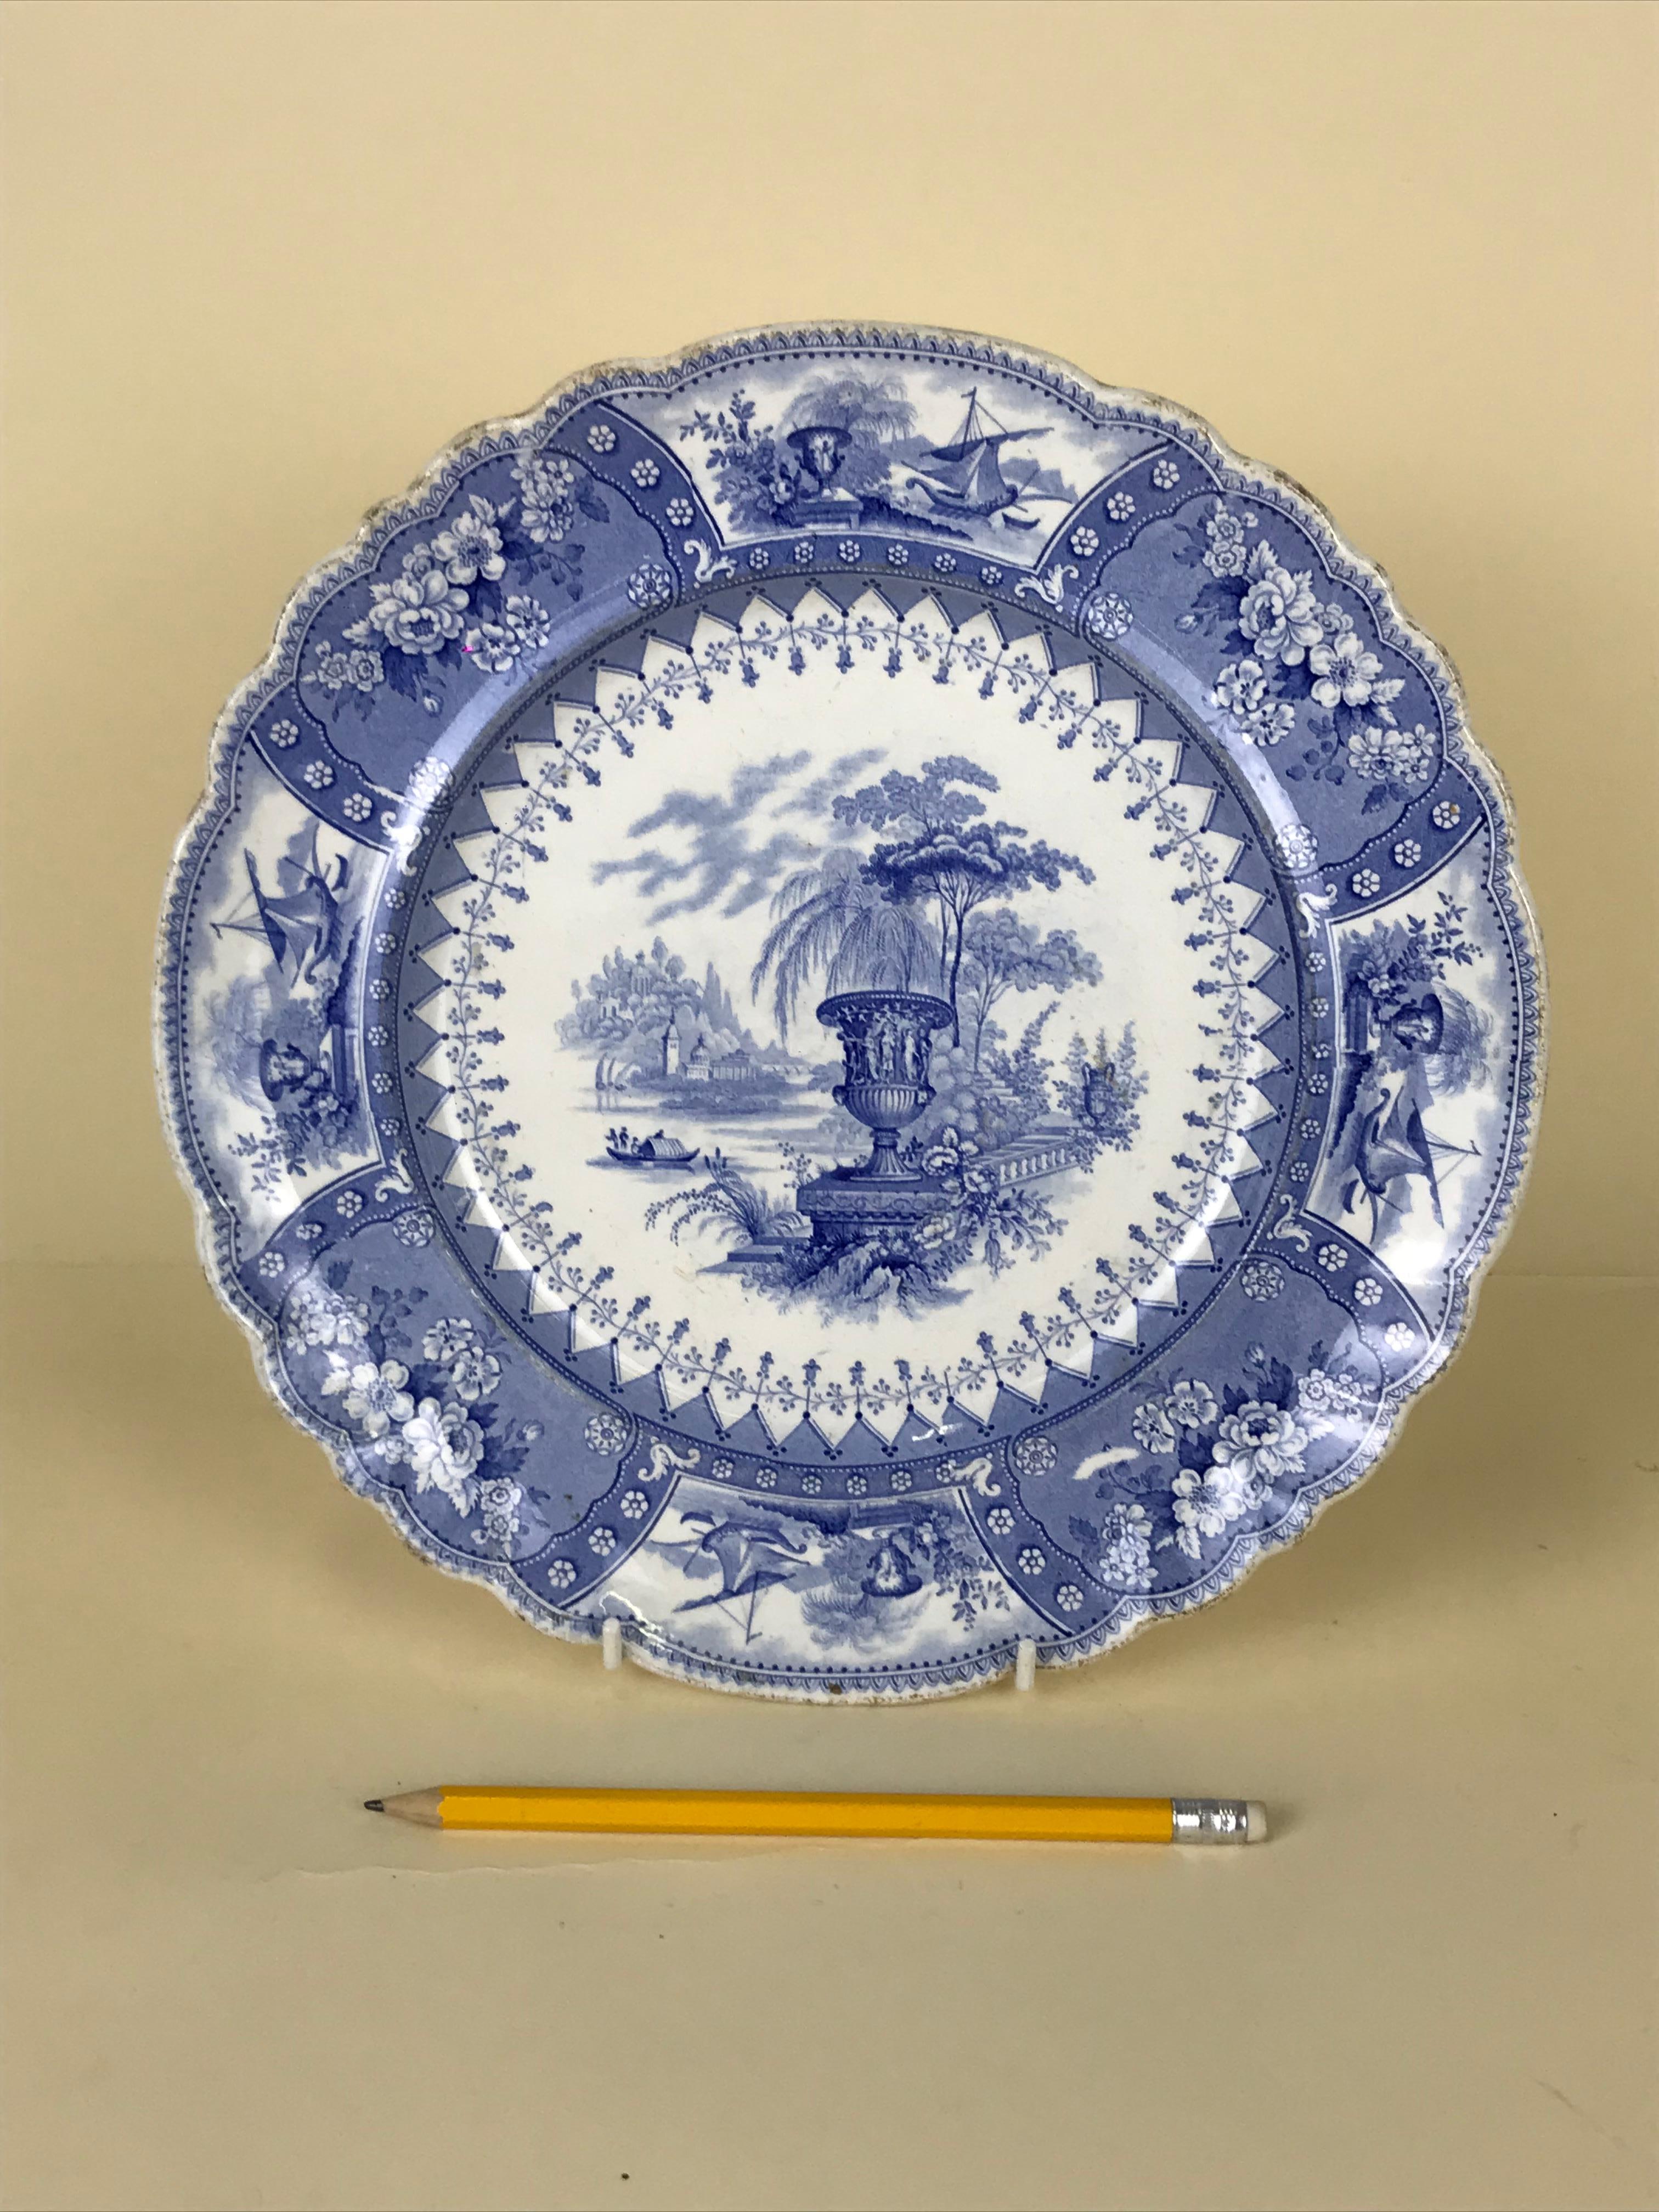 Antique English light blue and white transfer dinner plate made in Longport, Staffordshire and printed in the 